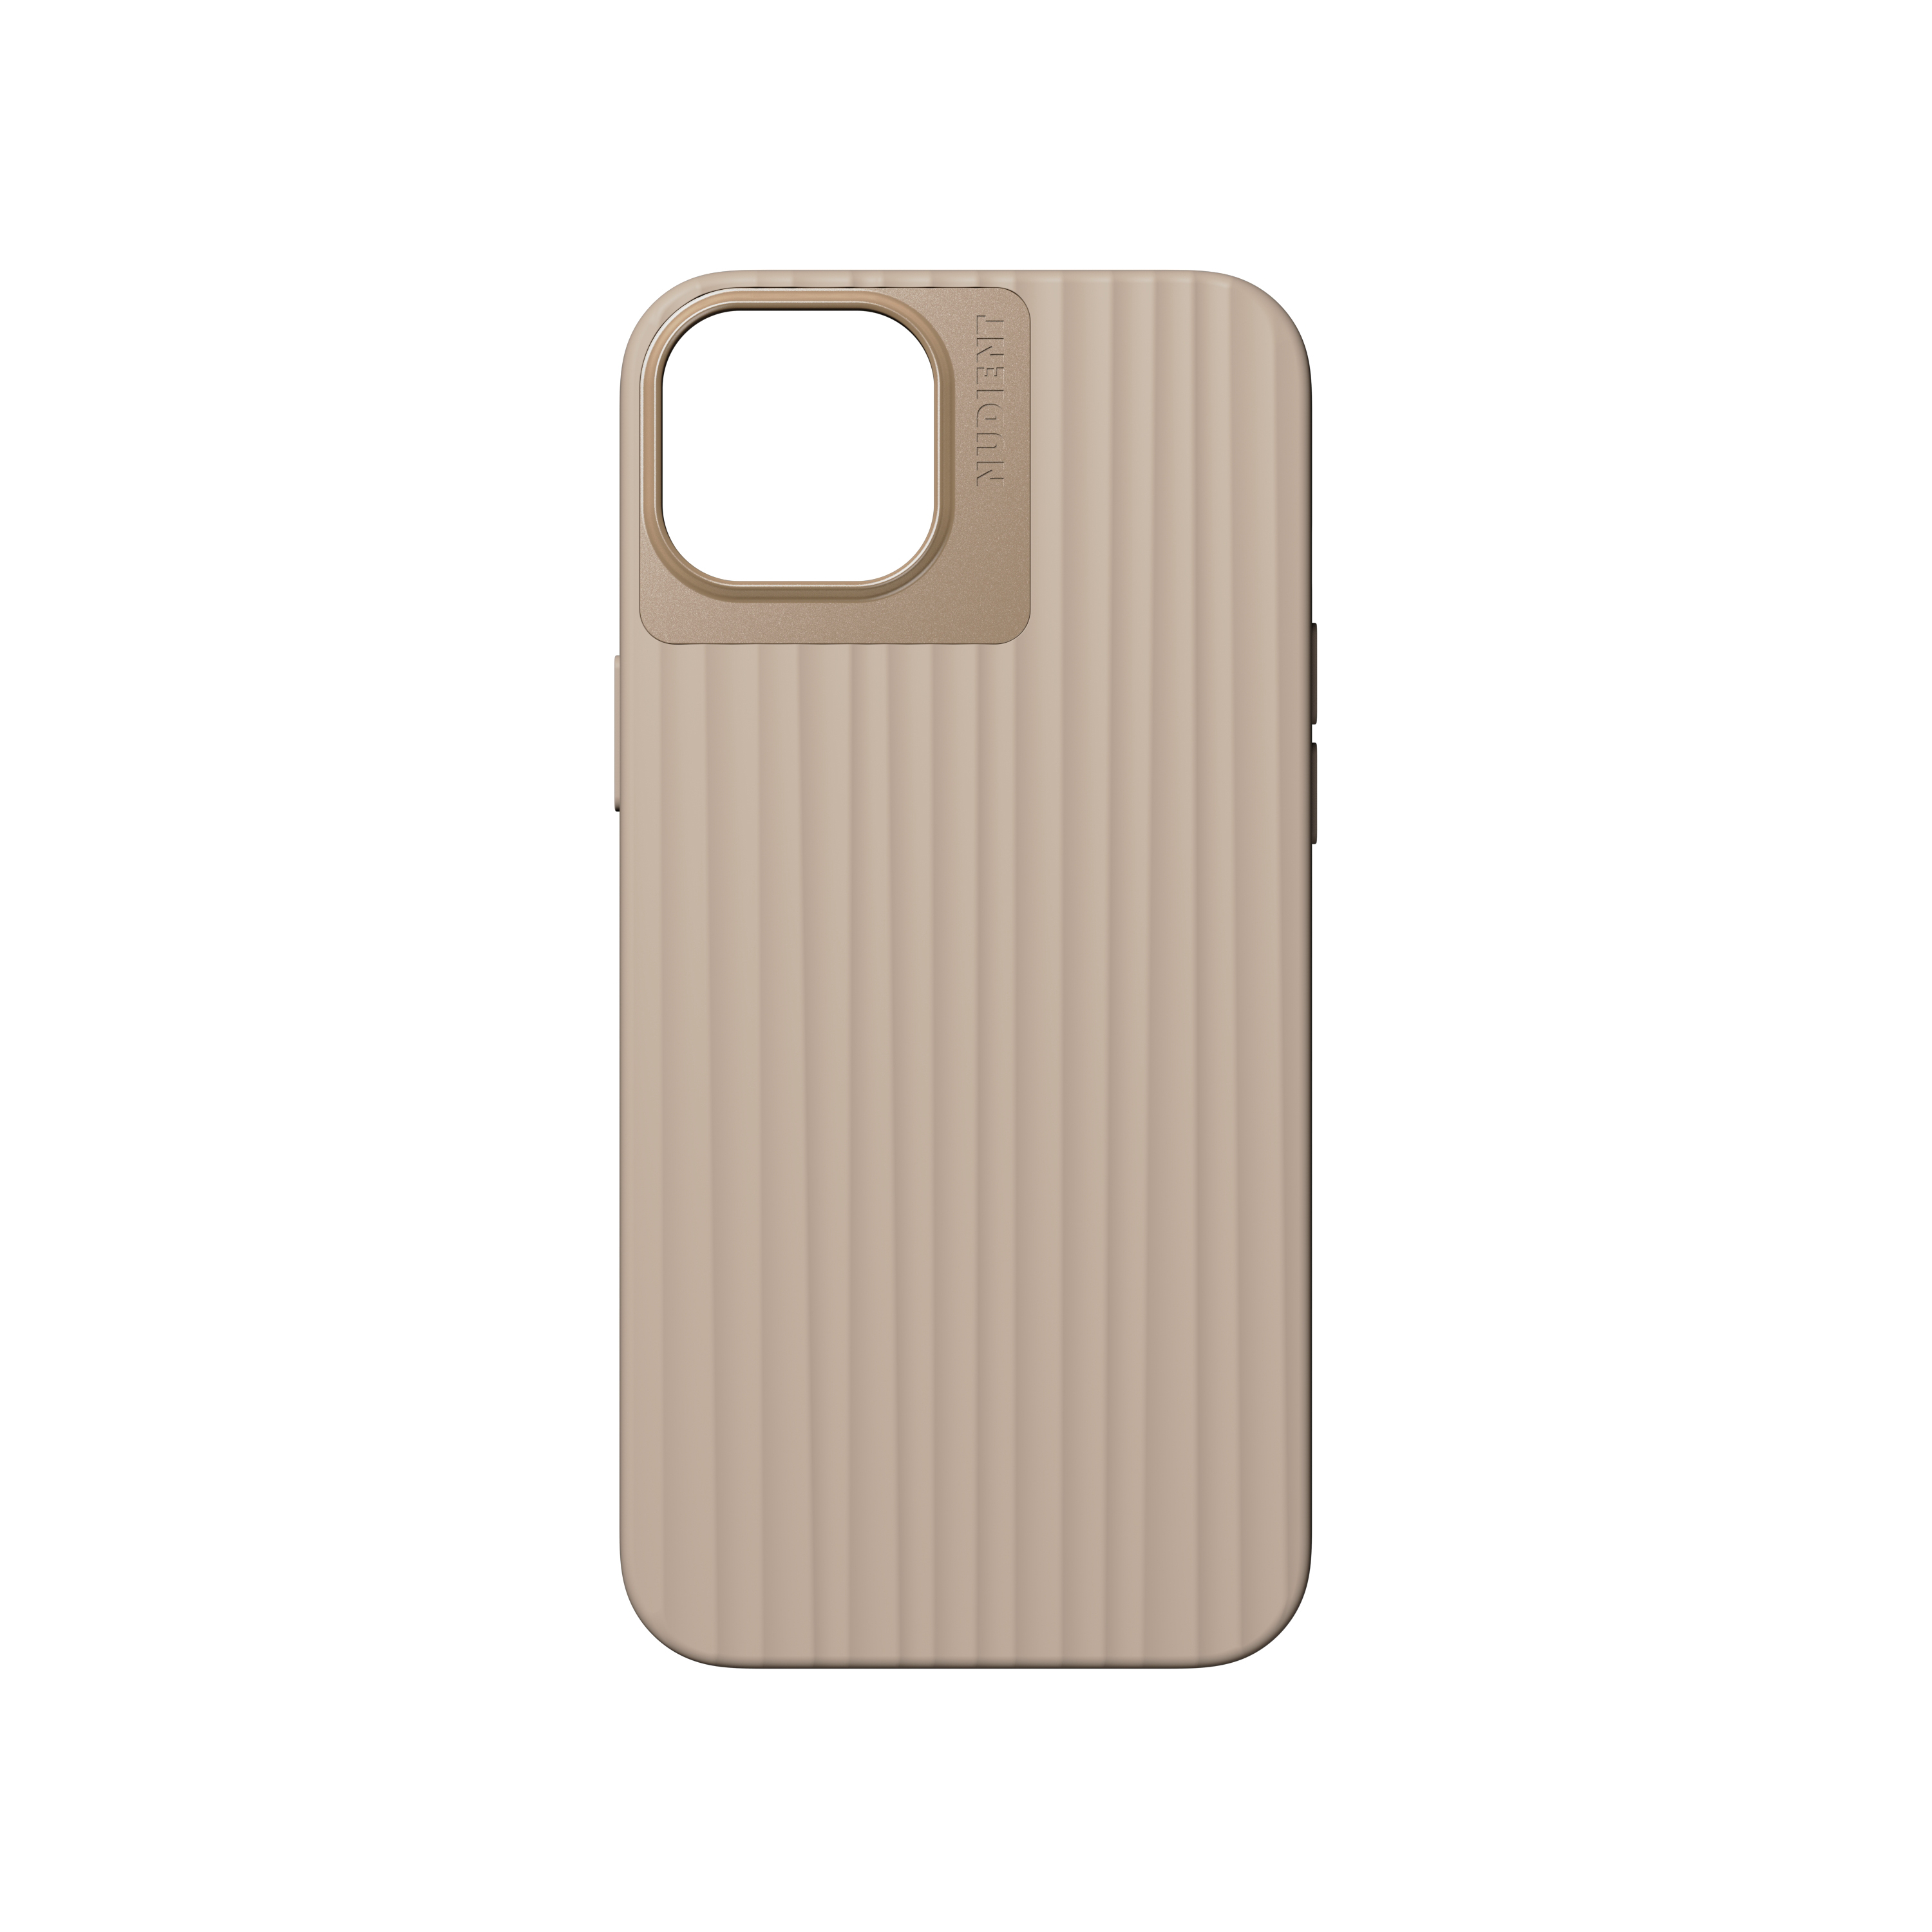 15 Bold, Backcover, MAX, NUDIENT SAND IPHONE PRO APPLE,